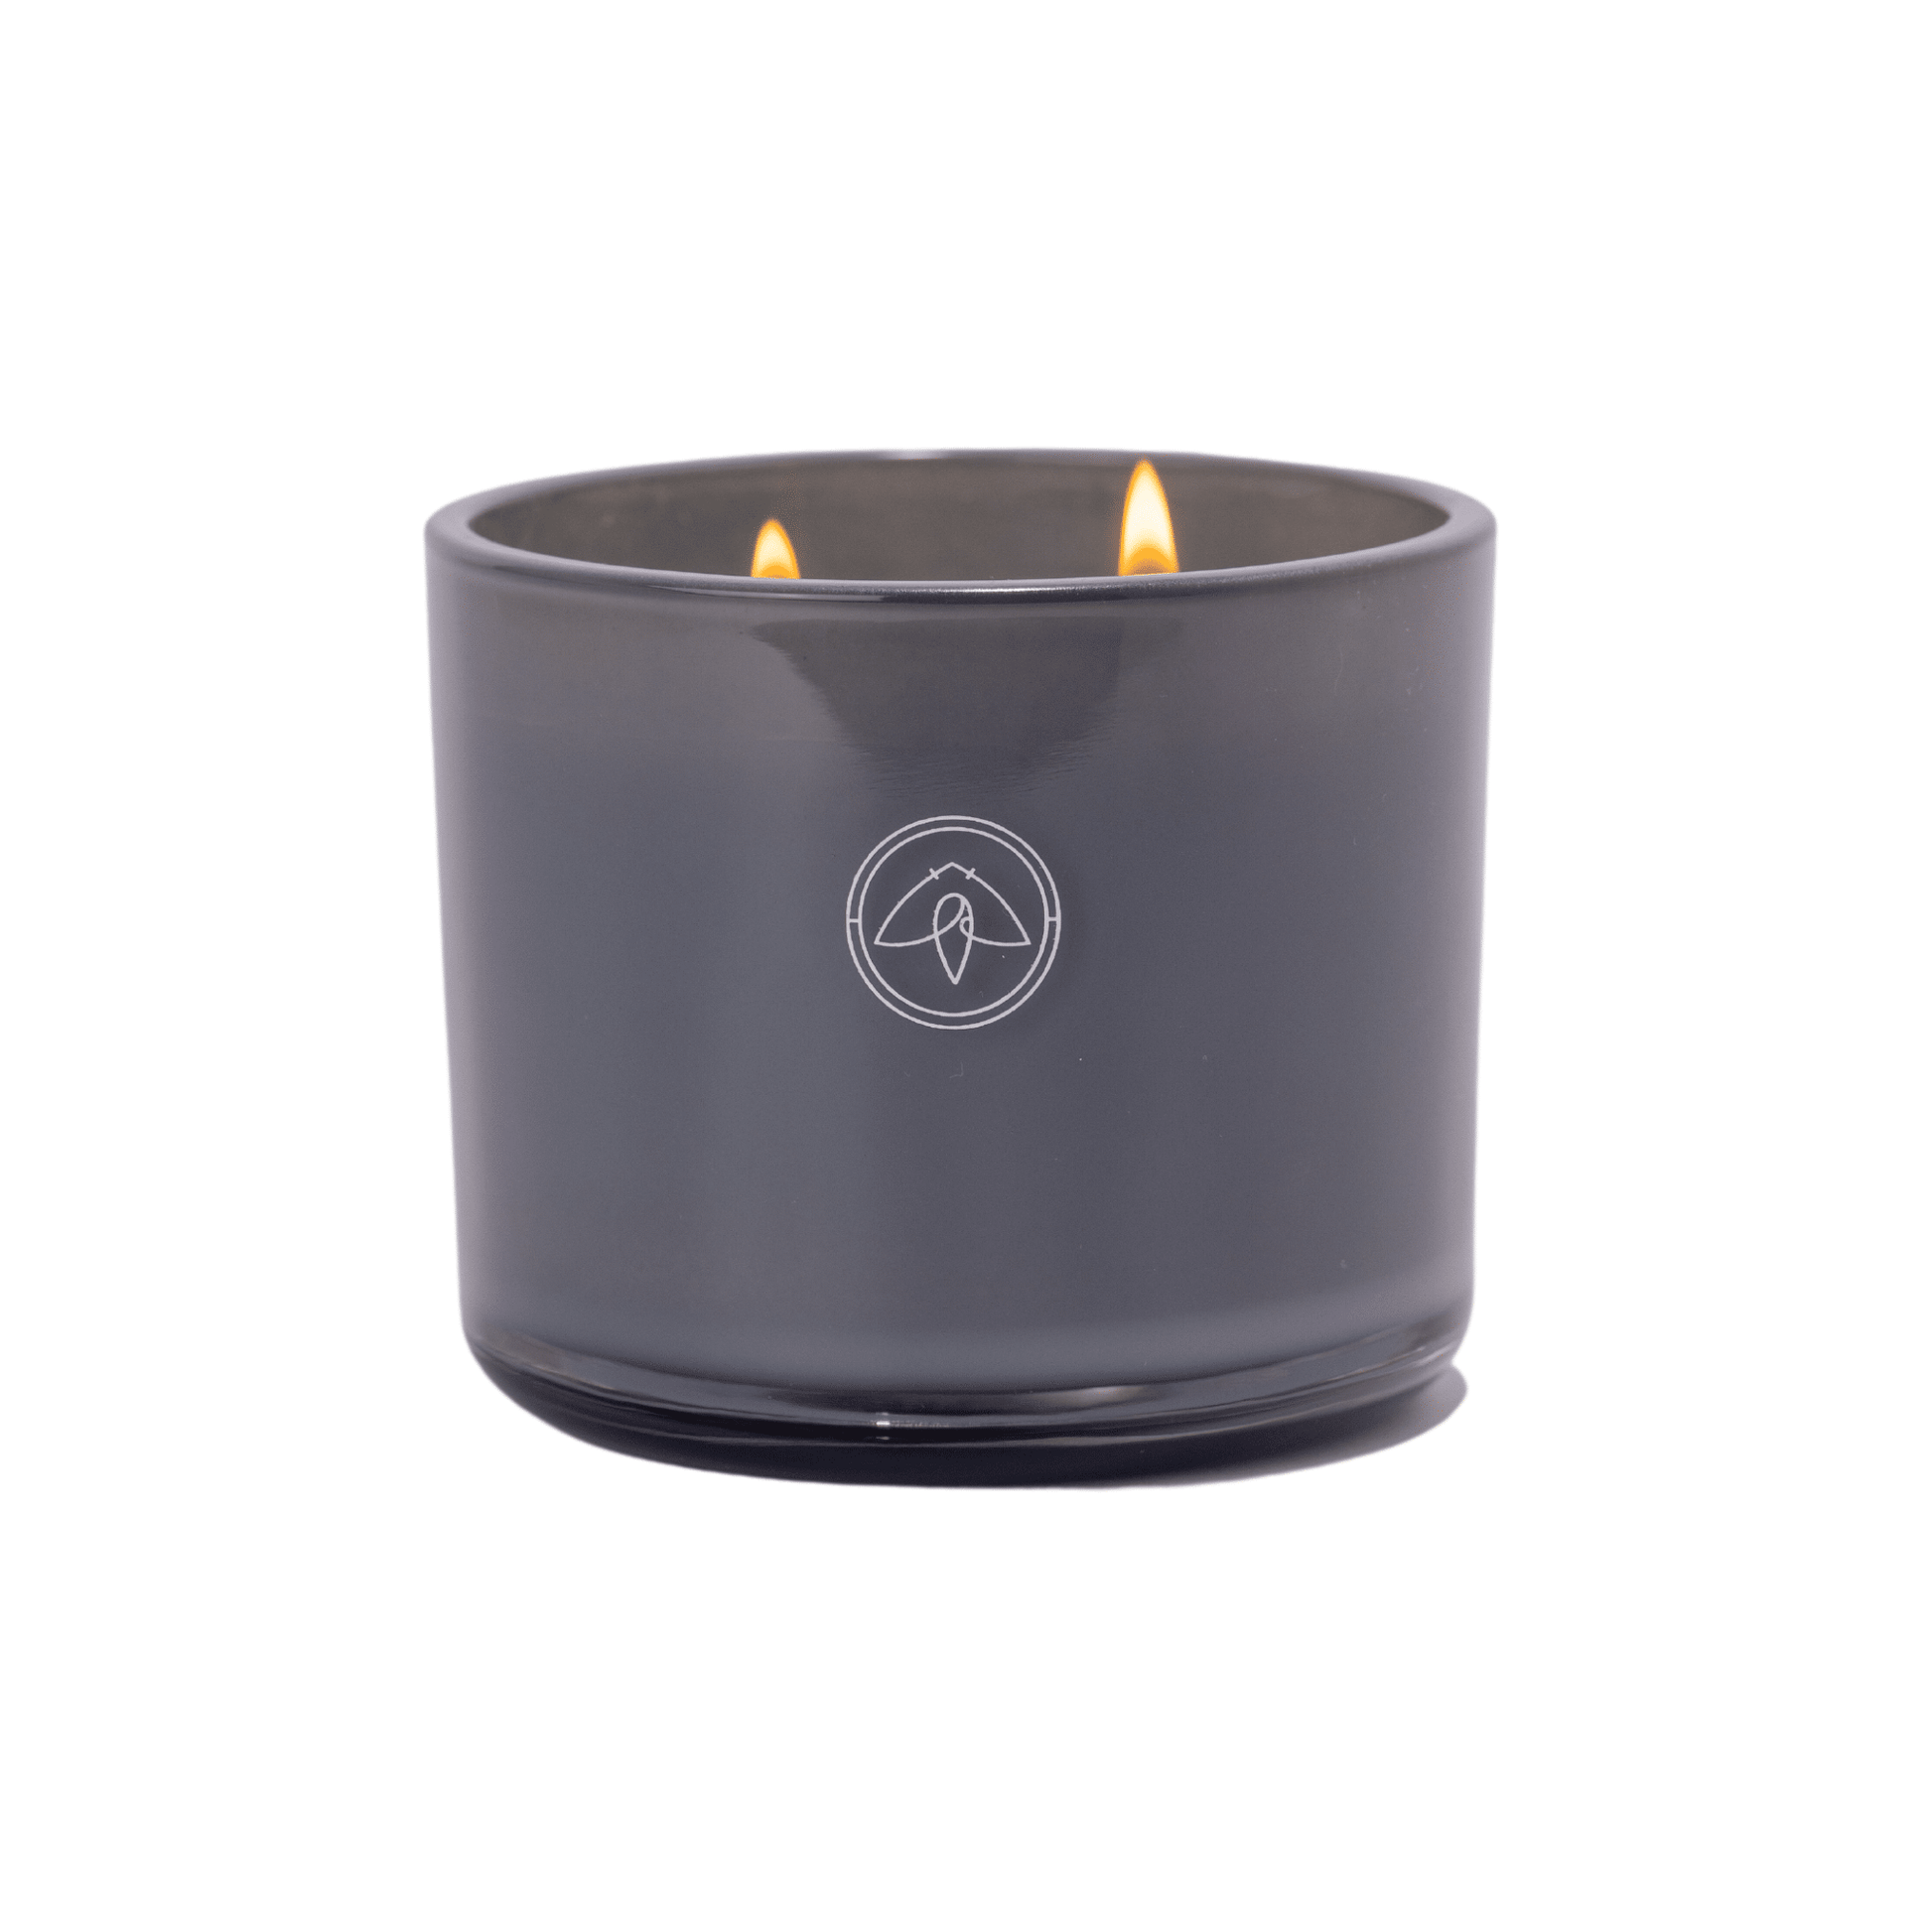 Products Serenity 10oz. Candle - Firefly by Paddywax - Bamboo Breeze lit two wick candle on white background